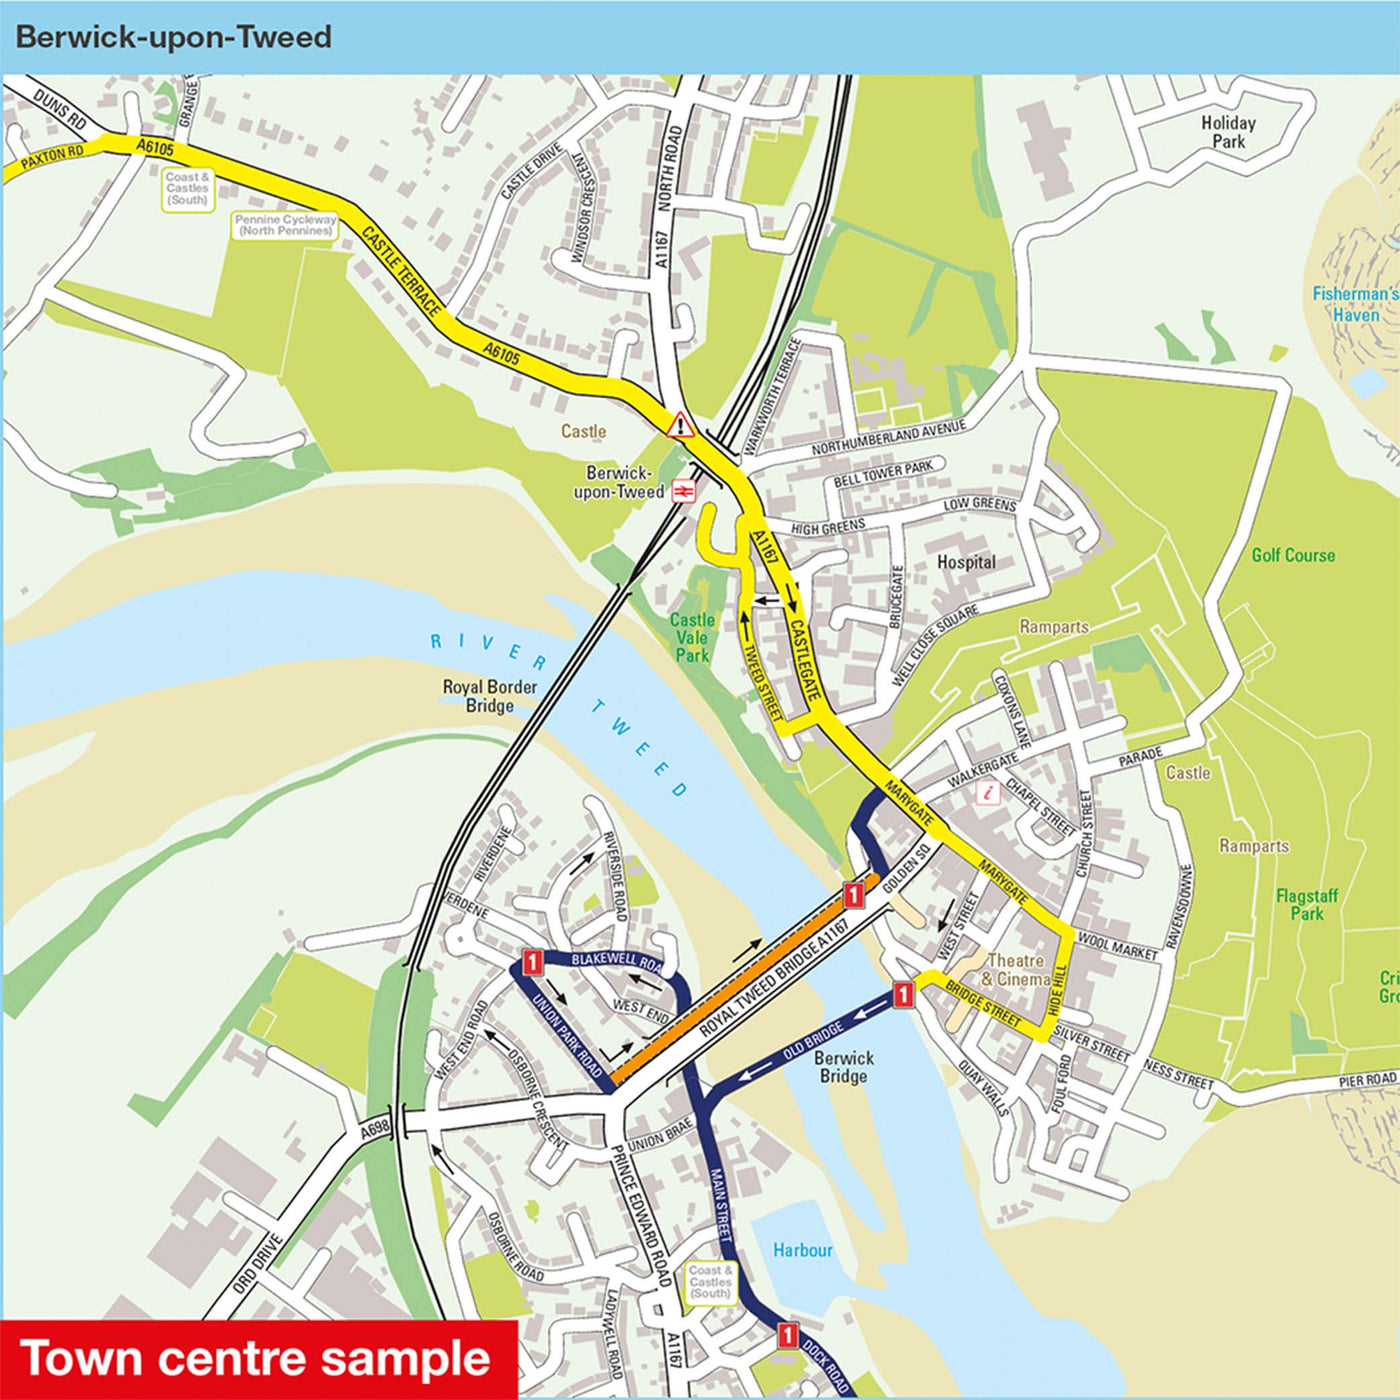 Town centre sample: Berwick-upon-Tweed, featuring route 1